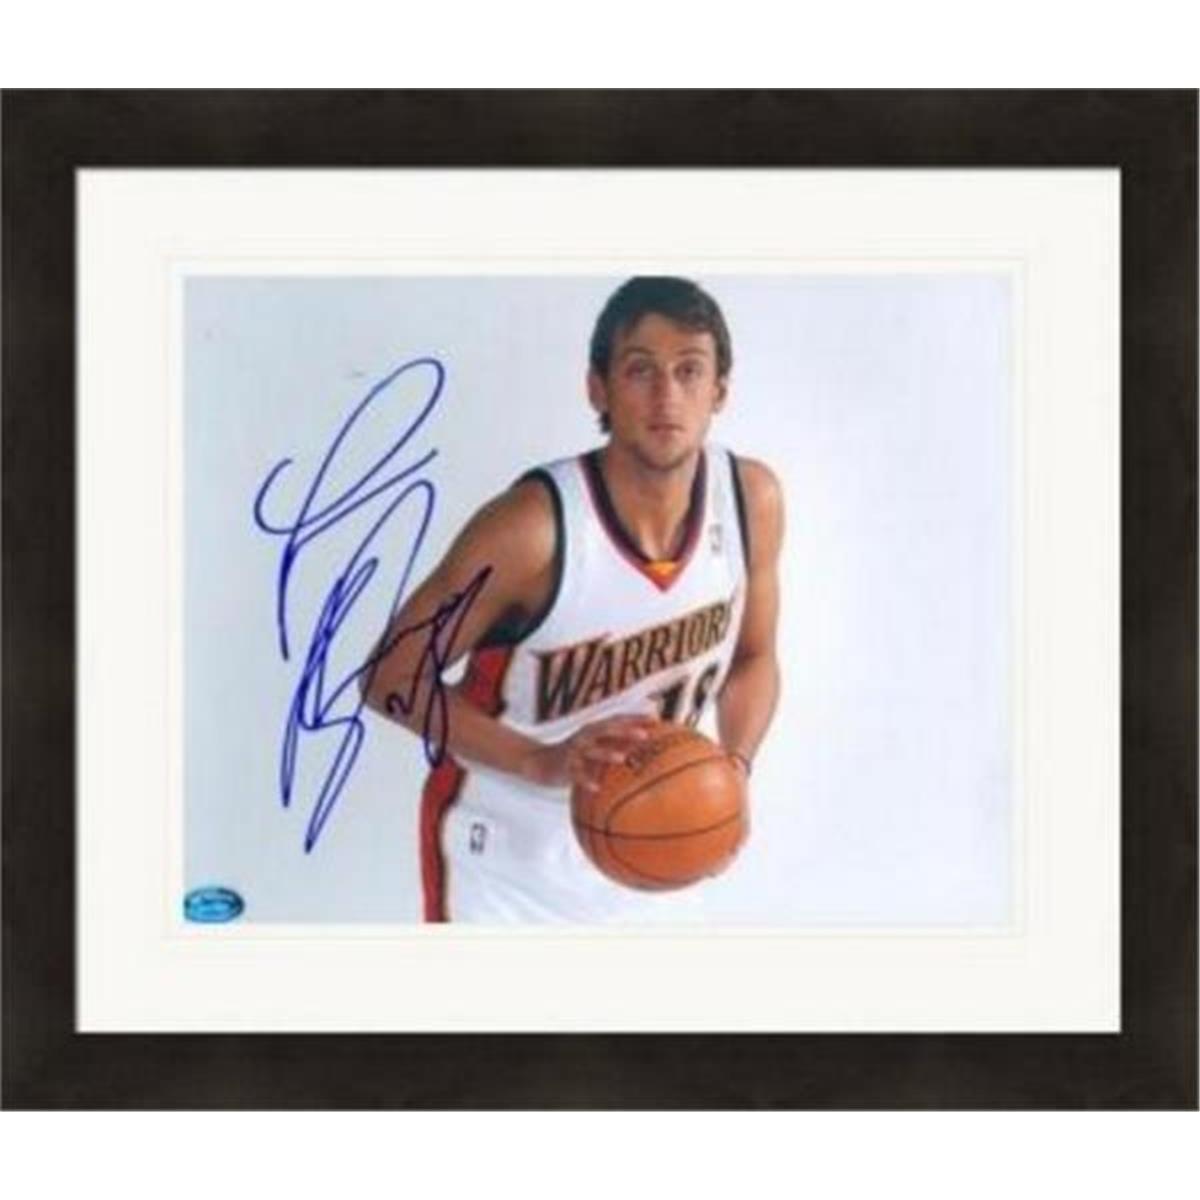 Picture of Autograph Warehouse 388621 8 x10 in. Marco Belinelli Autographed Photo - Matted & Framed